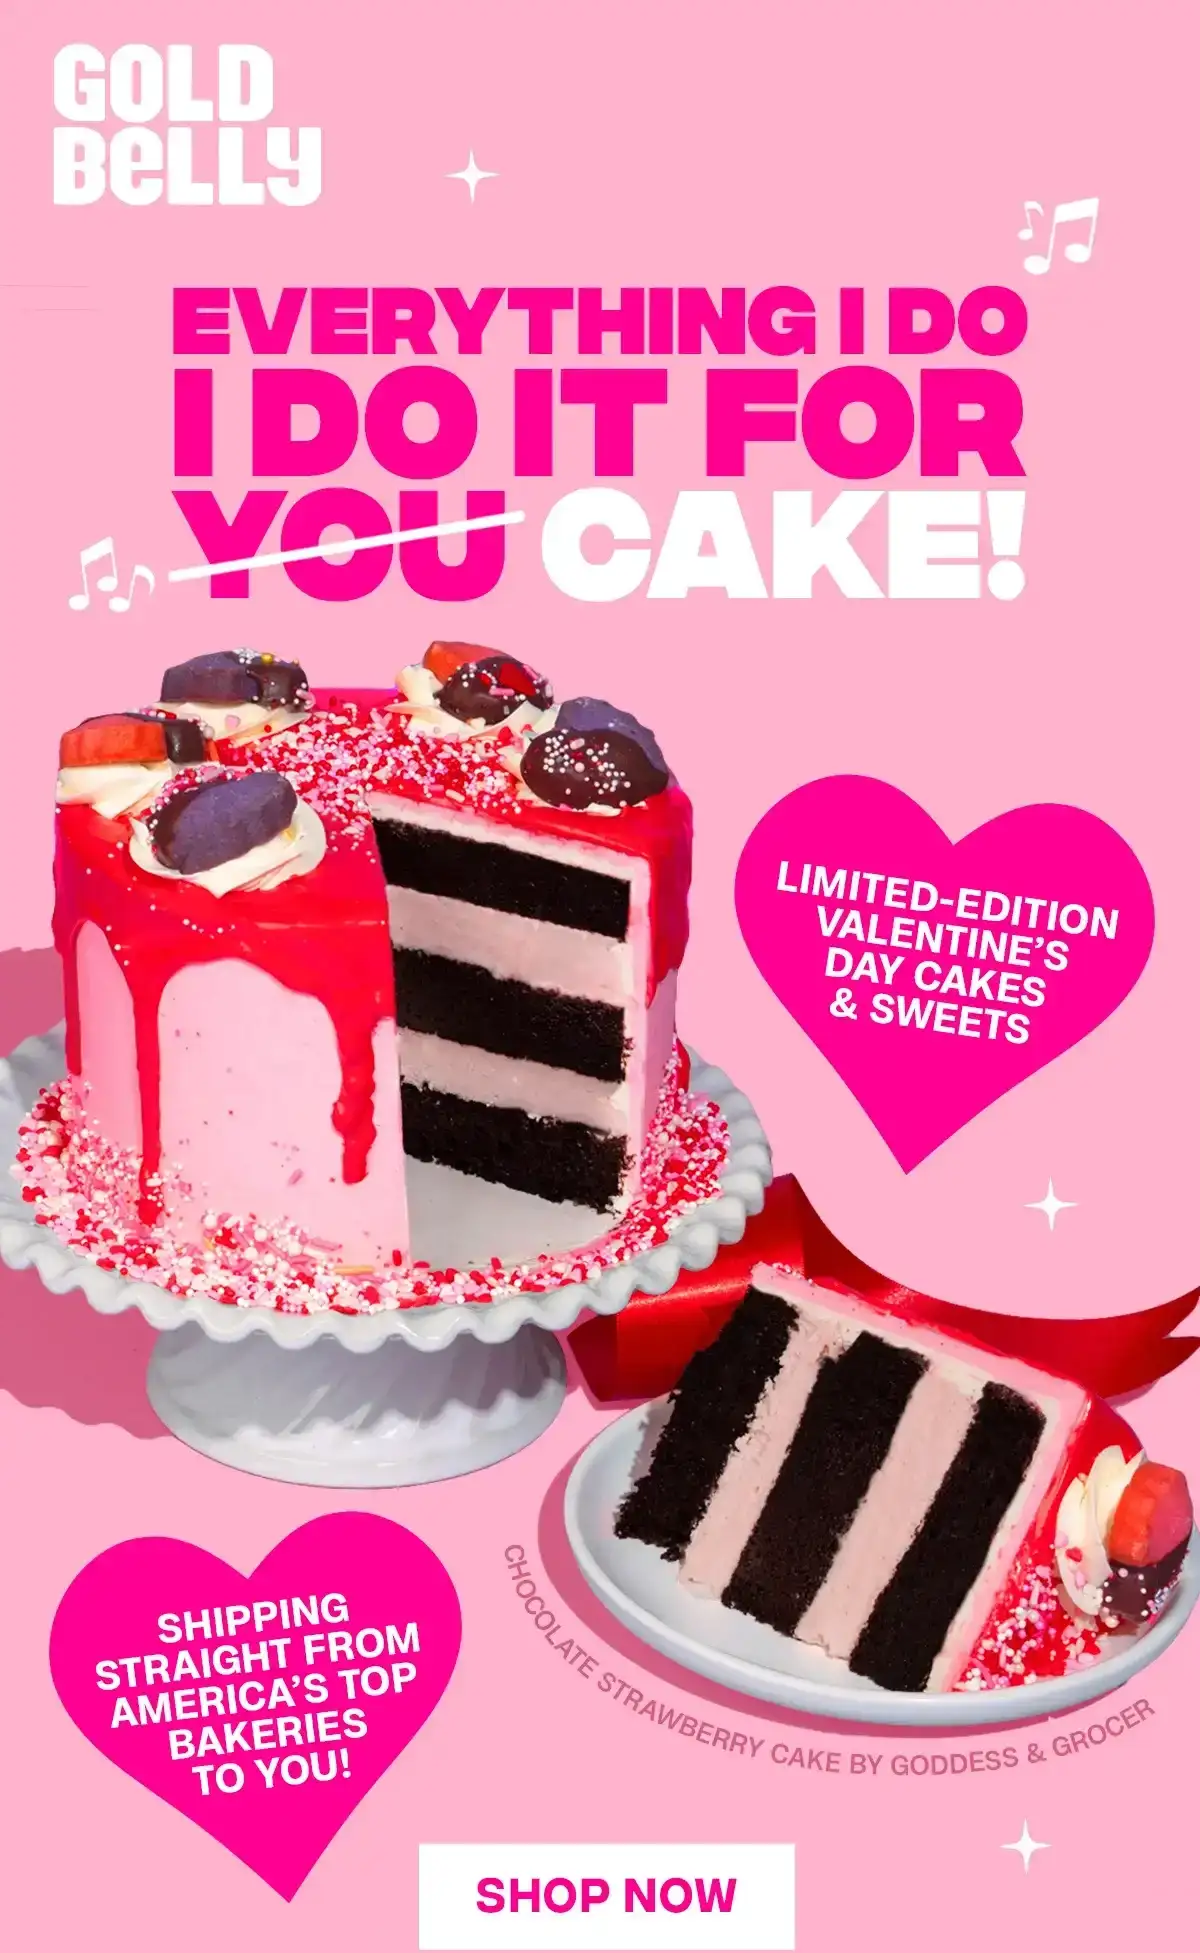 Limited-Edition Valentine's Day Cakes & Sweets